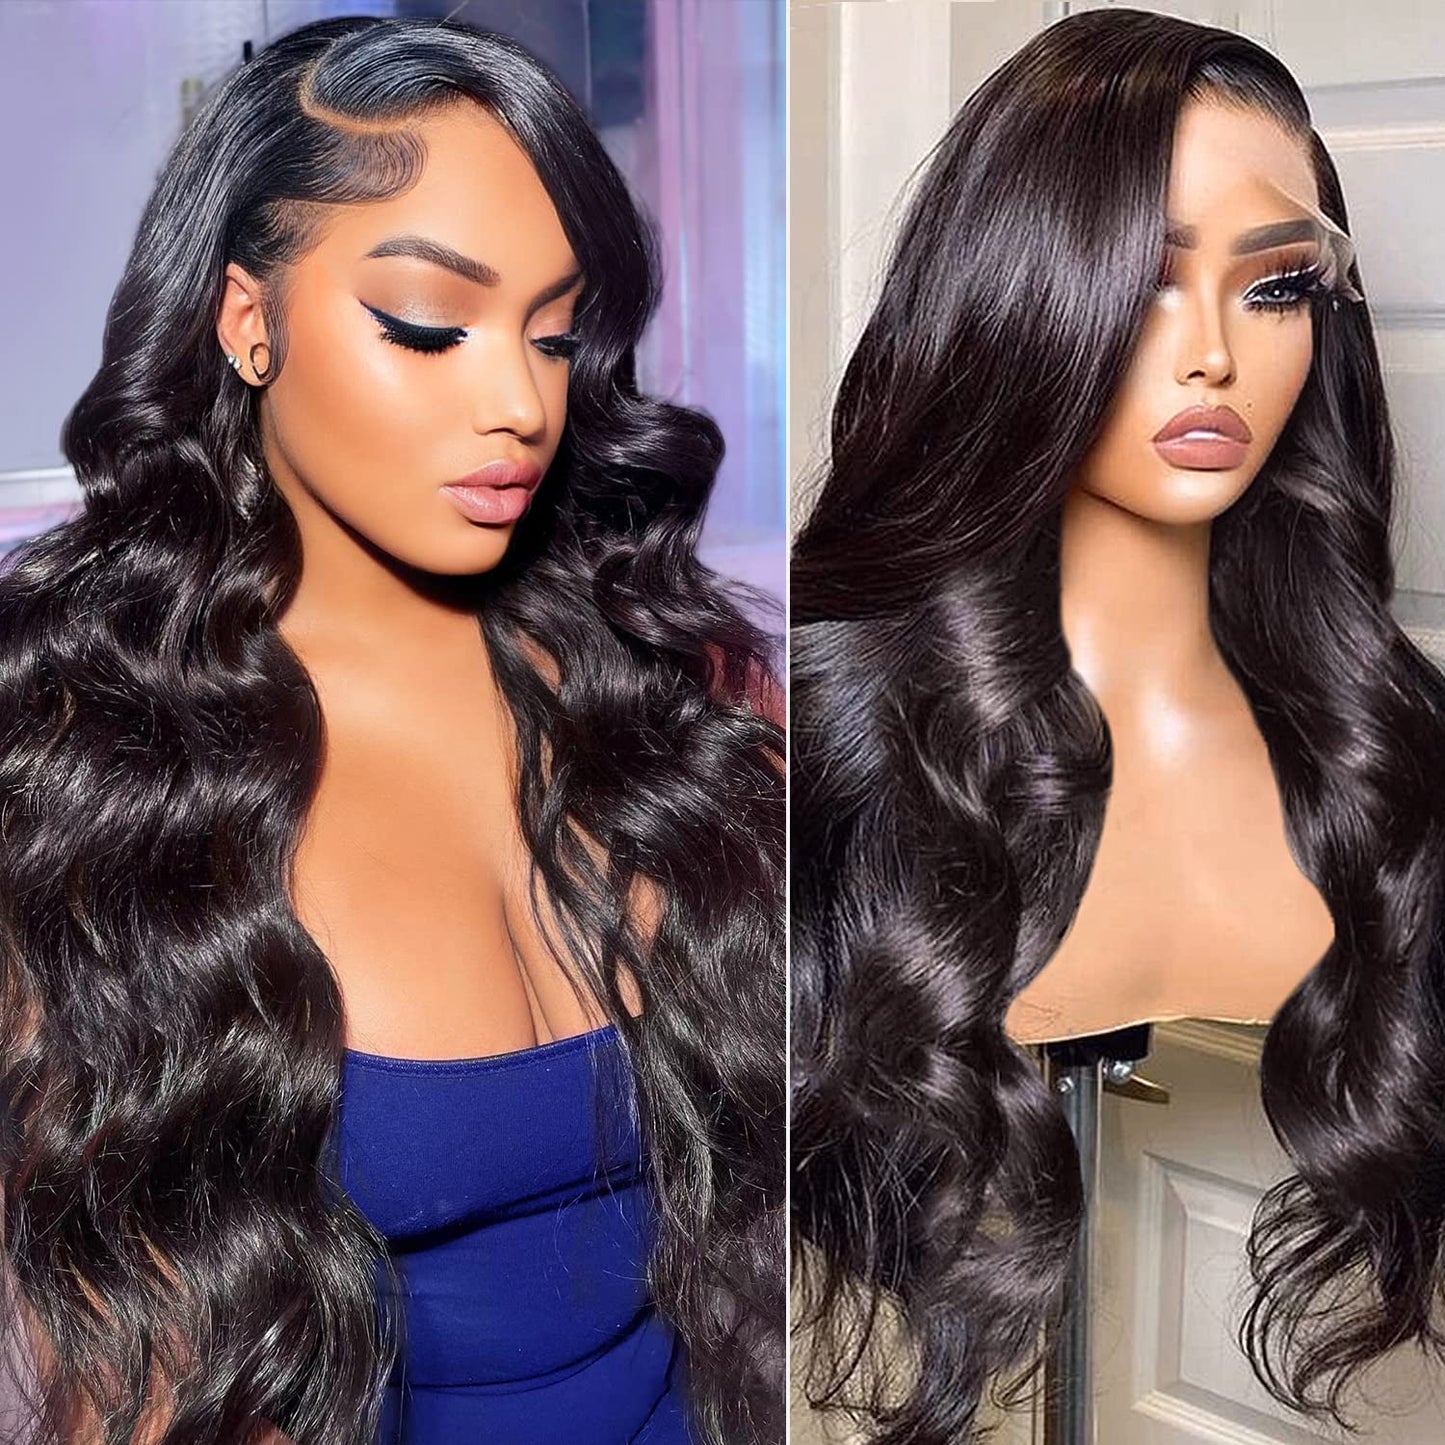 Flash Sale 150% Density 13x4 Lace Front Wigs 100 Remy Human Hair